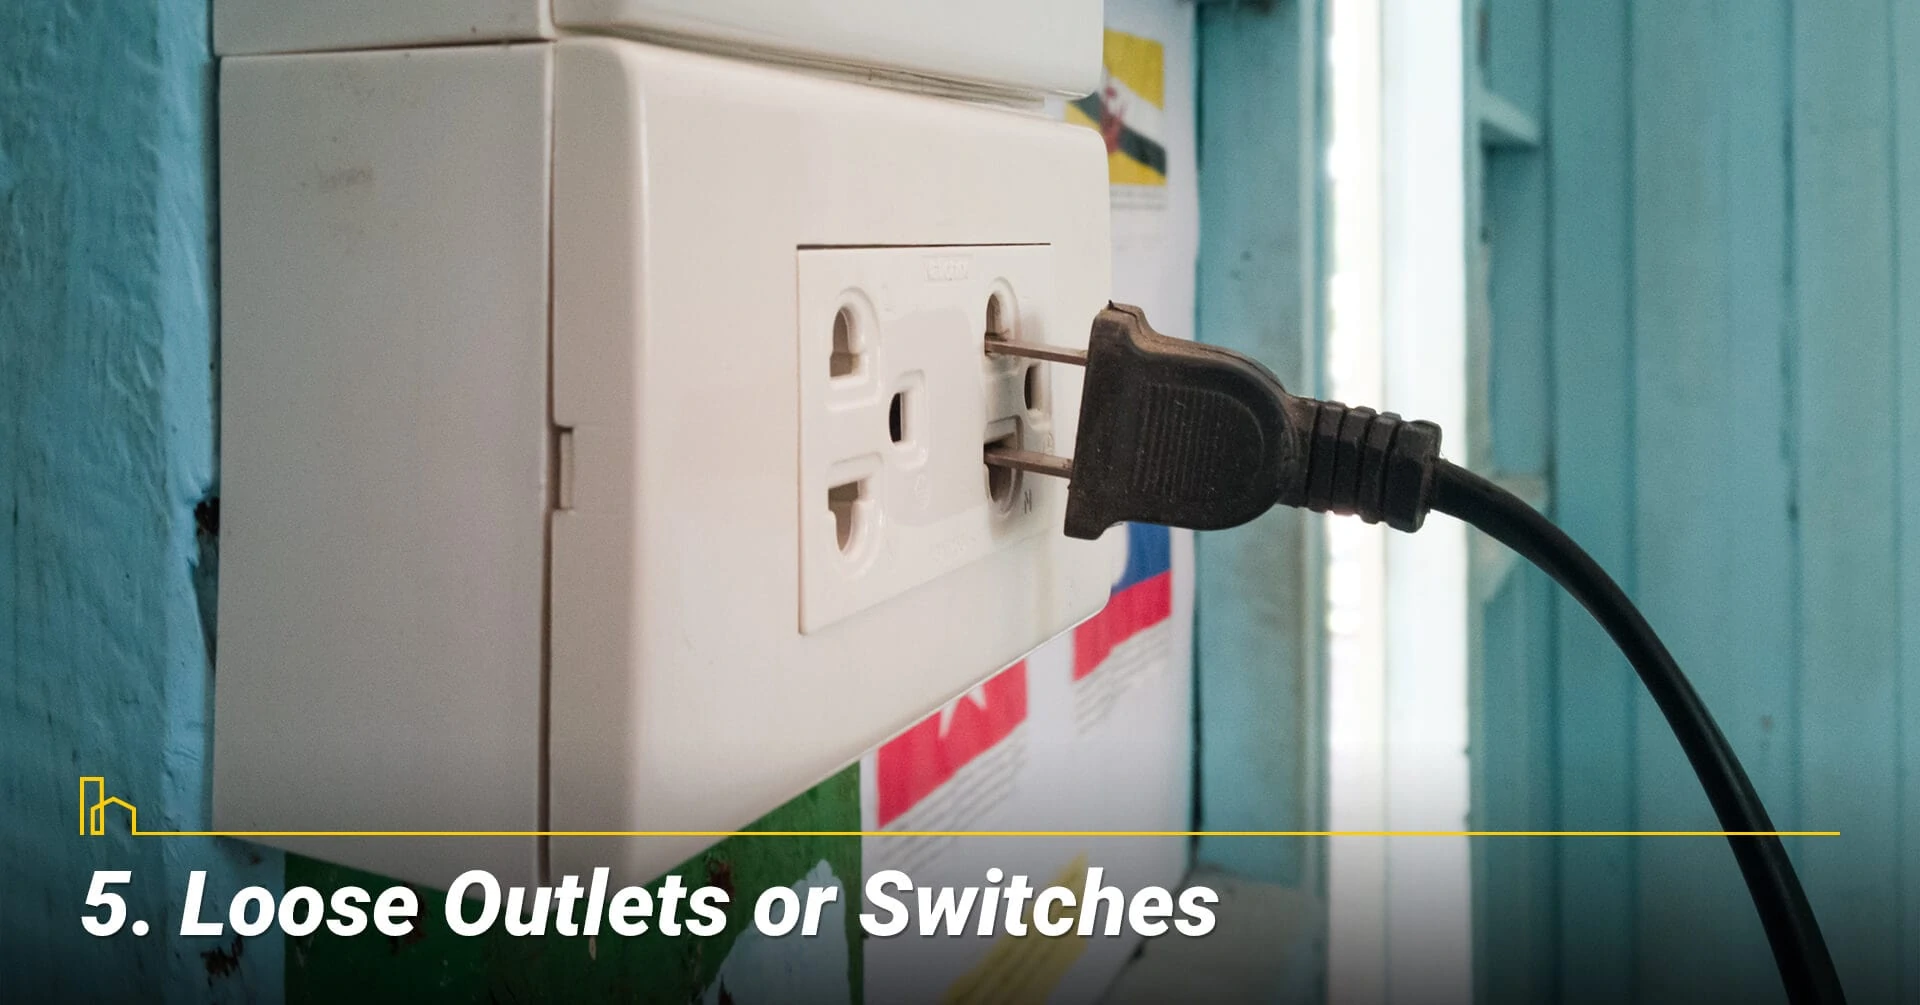 Loose Outlets or Switches, loosely fit outlets